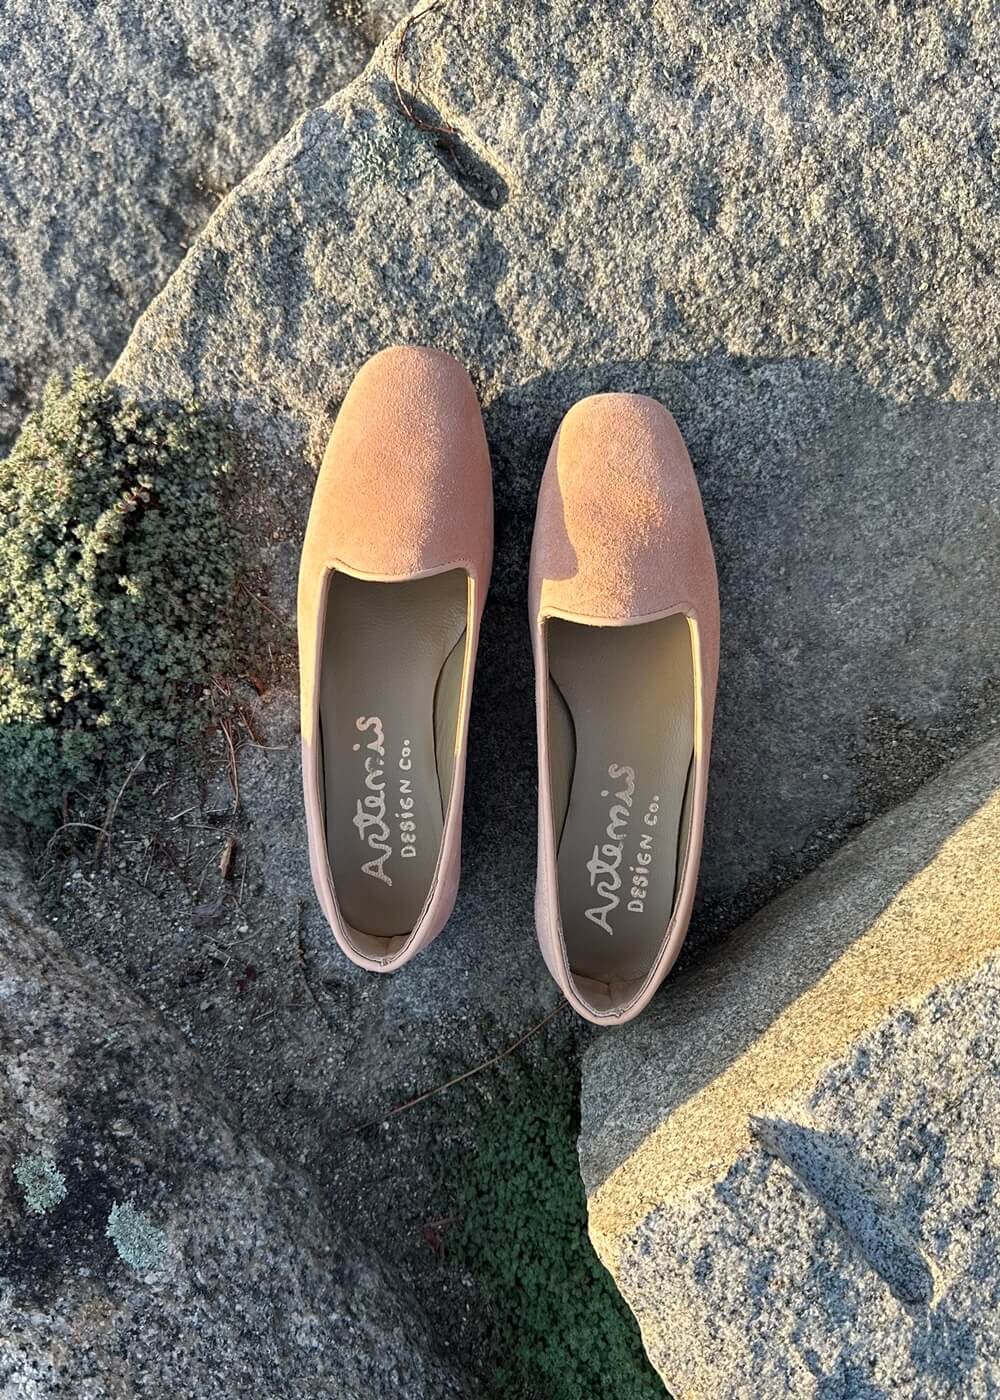 Artemis Design & Co's Women's Suede Loafers in pink are the perfect combination of style and comfort. Crafted with premium suede materials, these loafers feature a sleek design with attention to detail (Front View)